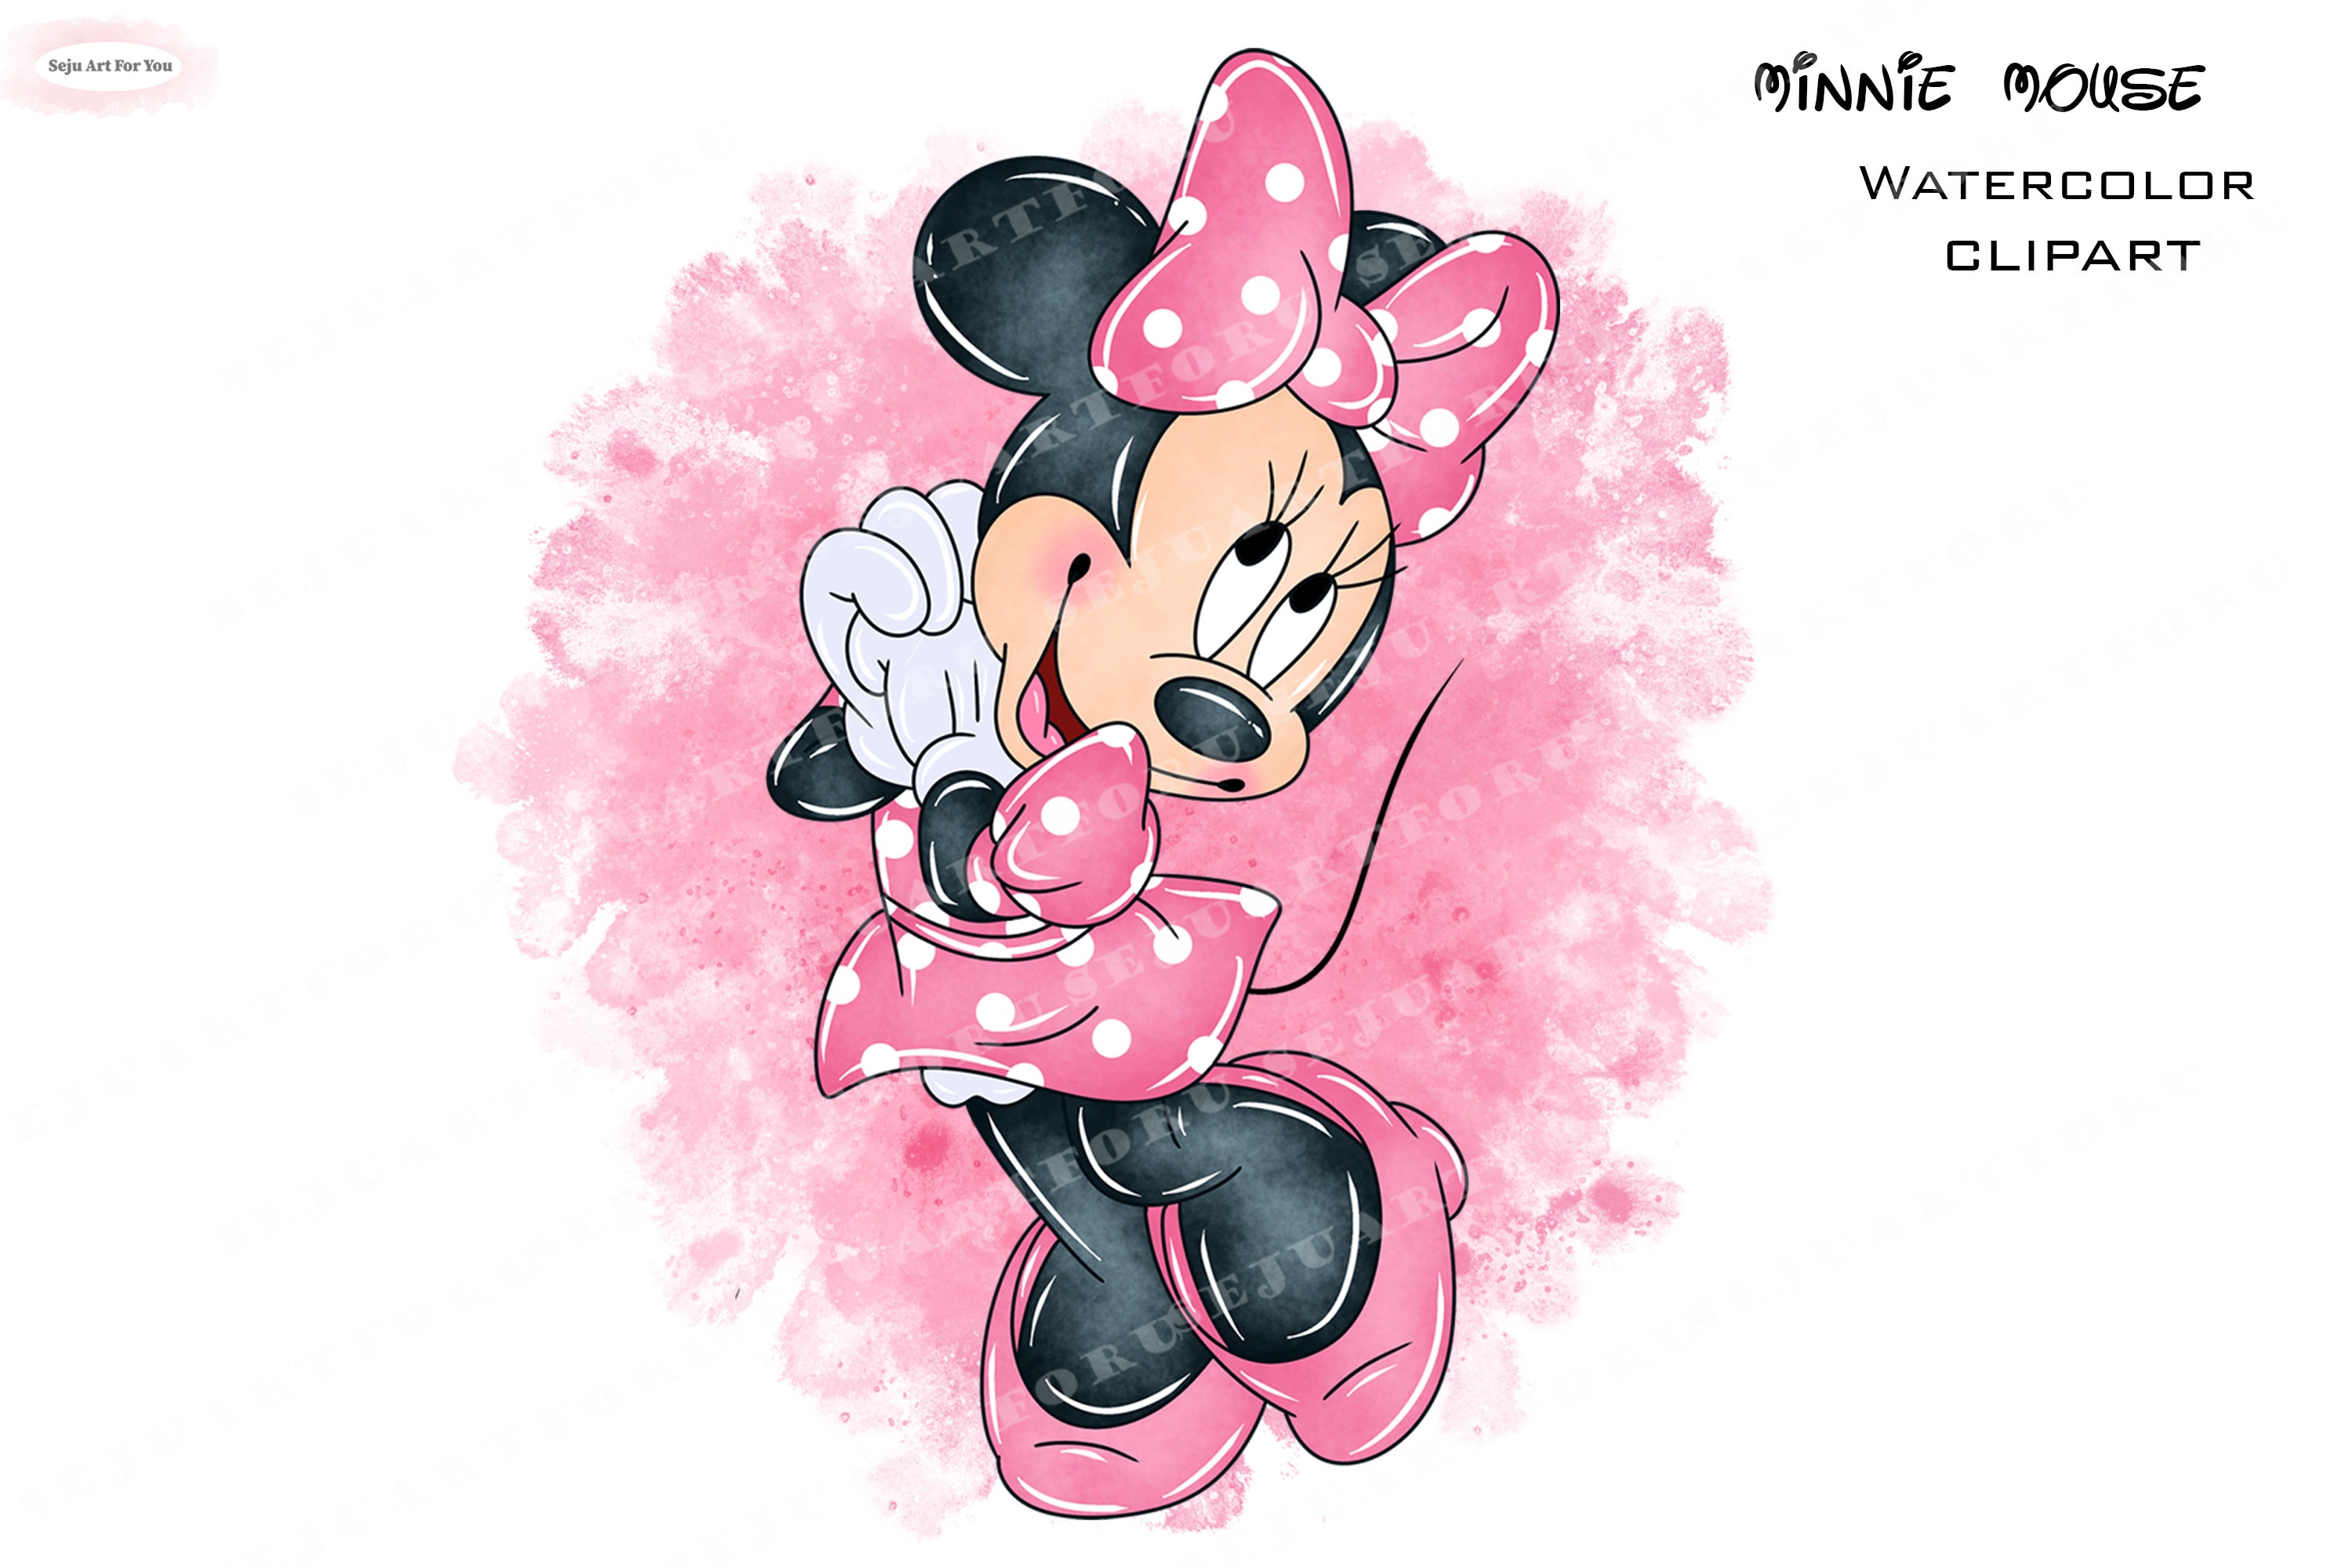 Minnie Watercolor Minnie Mouse Clipart Minnie Watercolor - Etsy